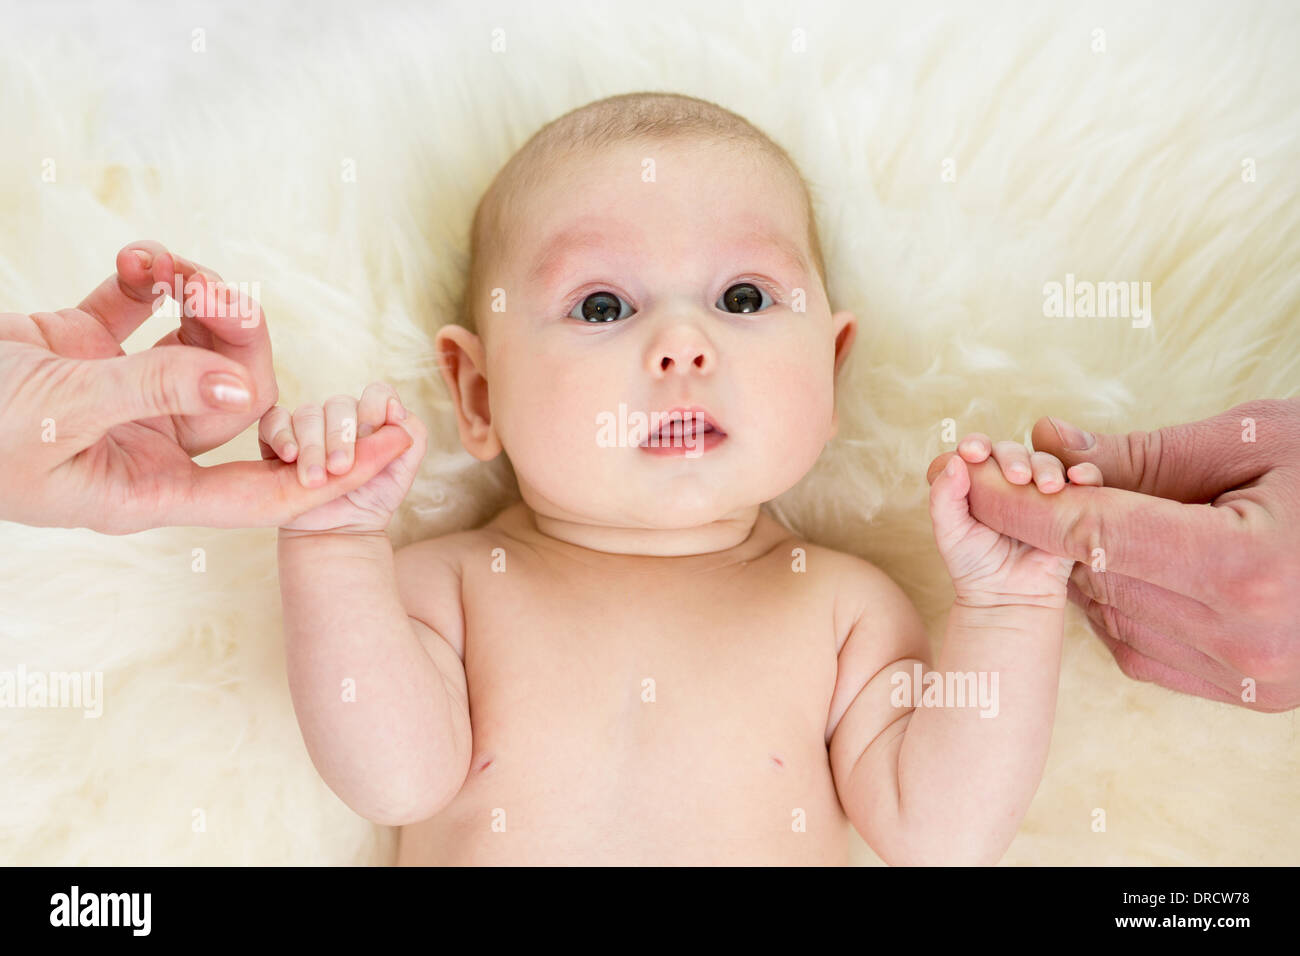 baby girl holding parental hands Stock Photo